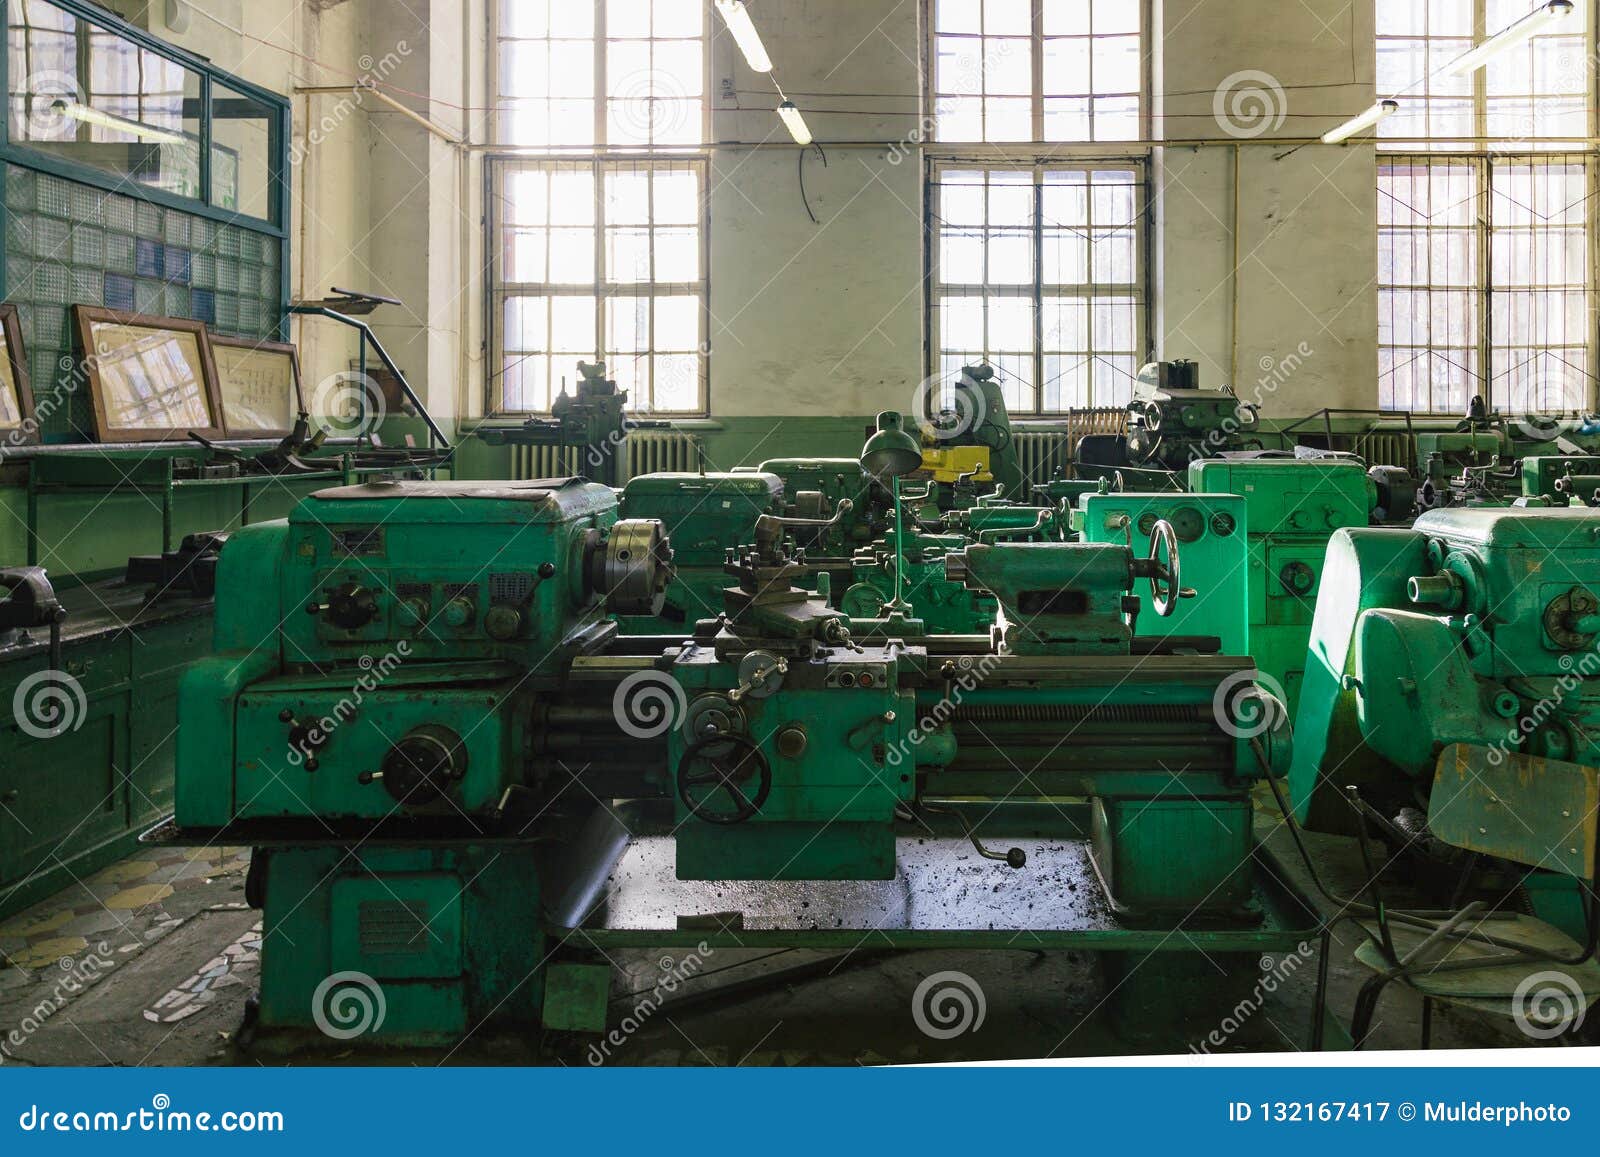 Industrial Turning and Drilling Machine Tools in Old Workshop Stock ...